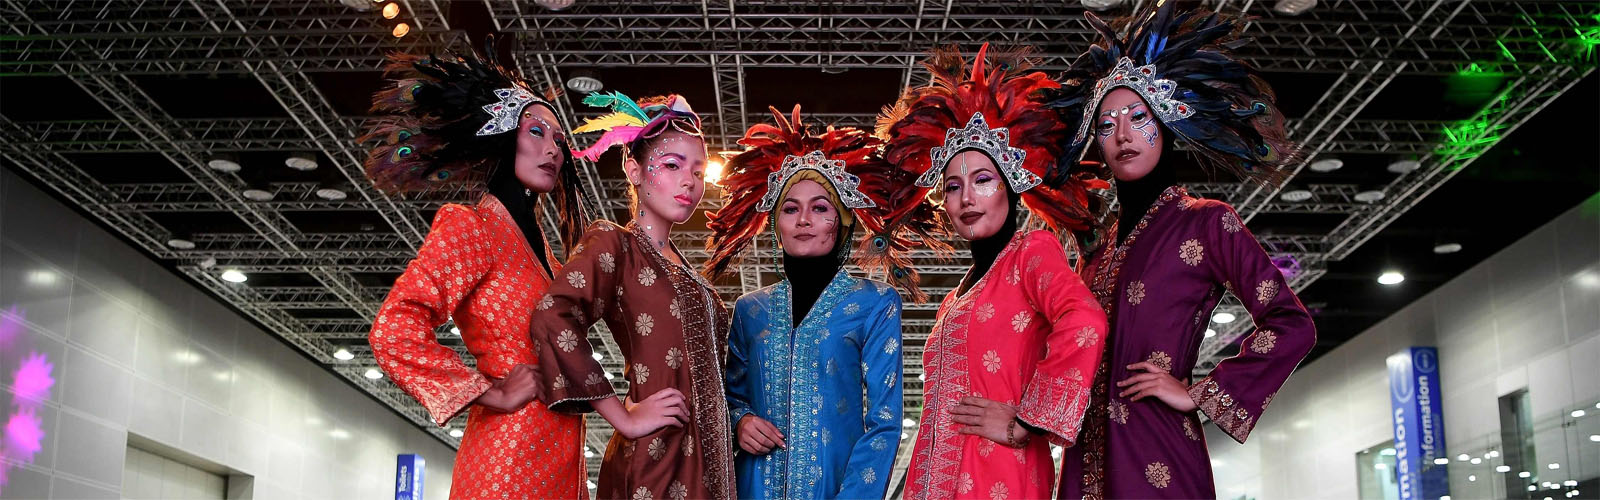 Make-up artists showcase peacock beauty in Malaysia